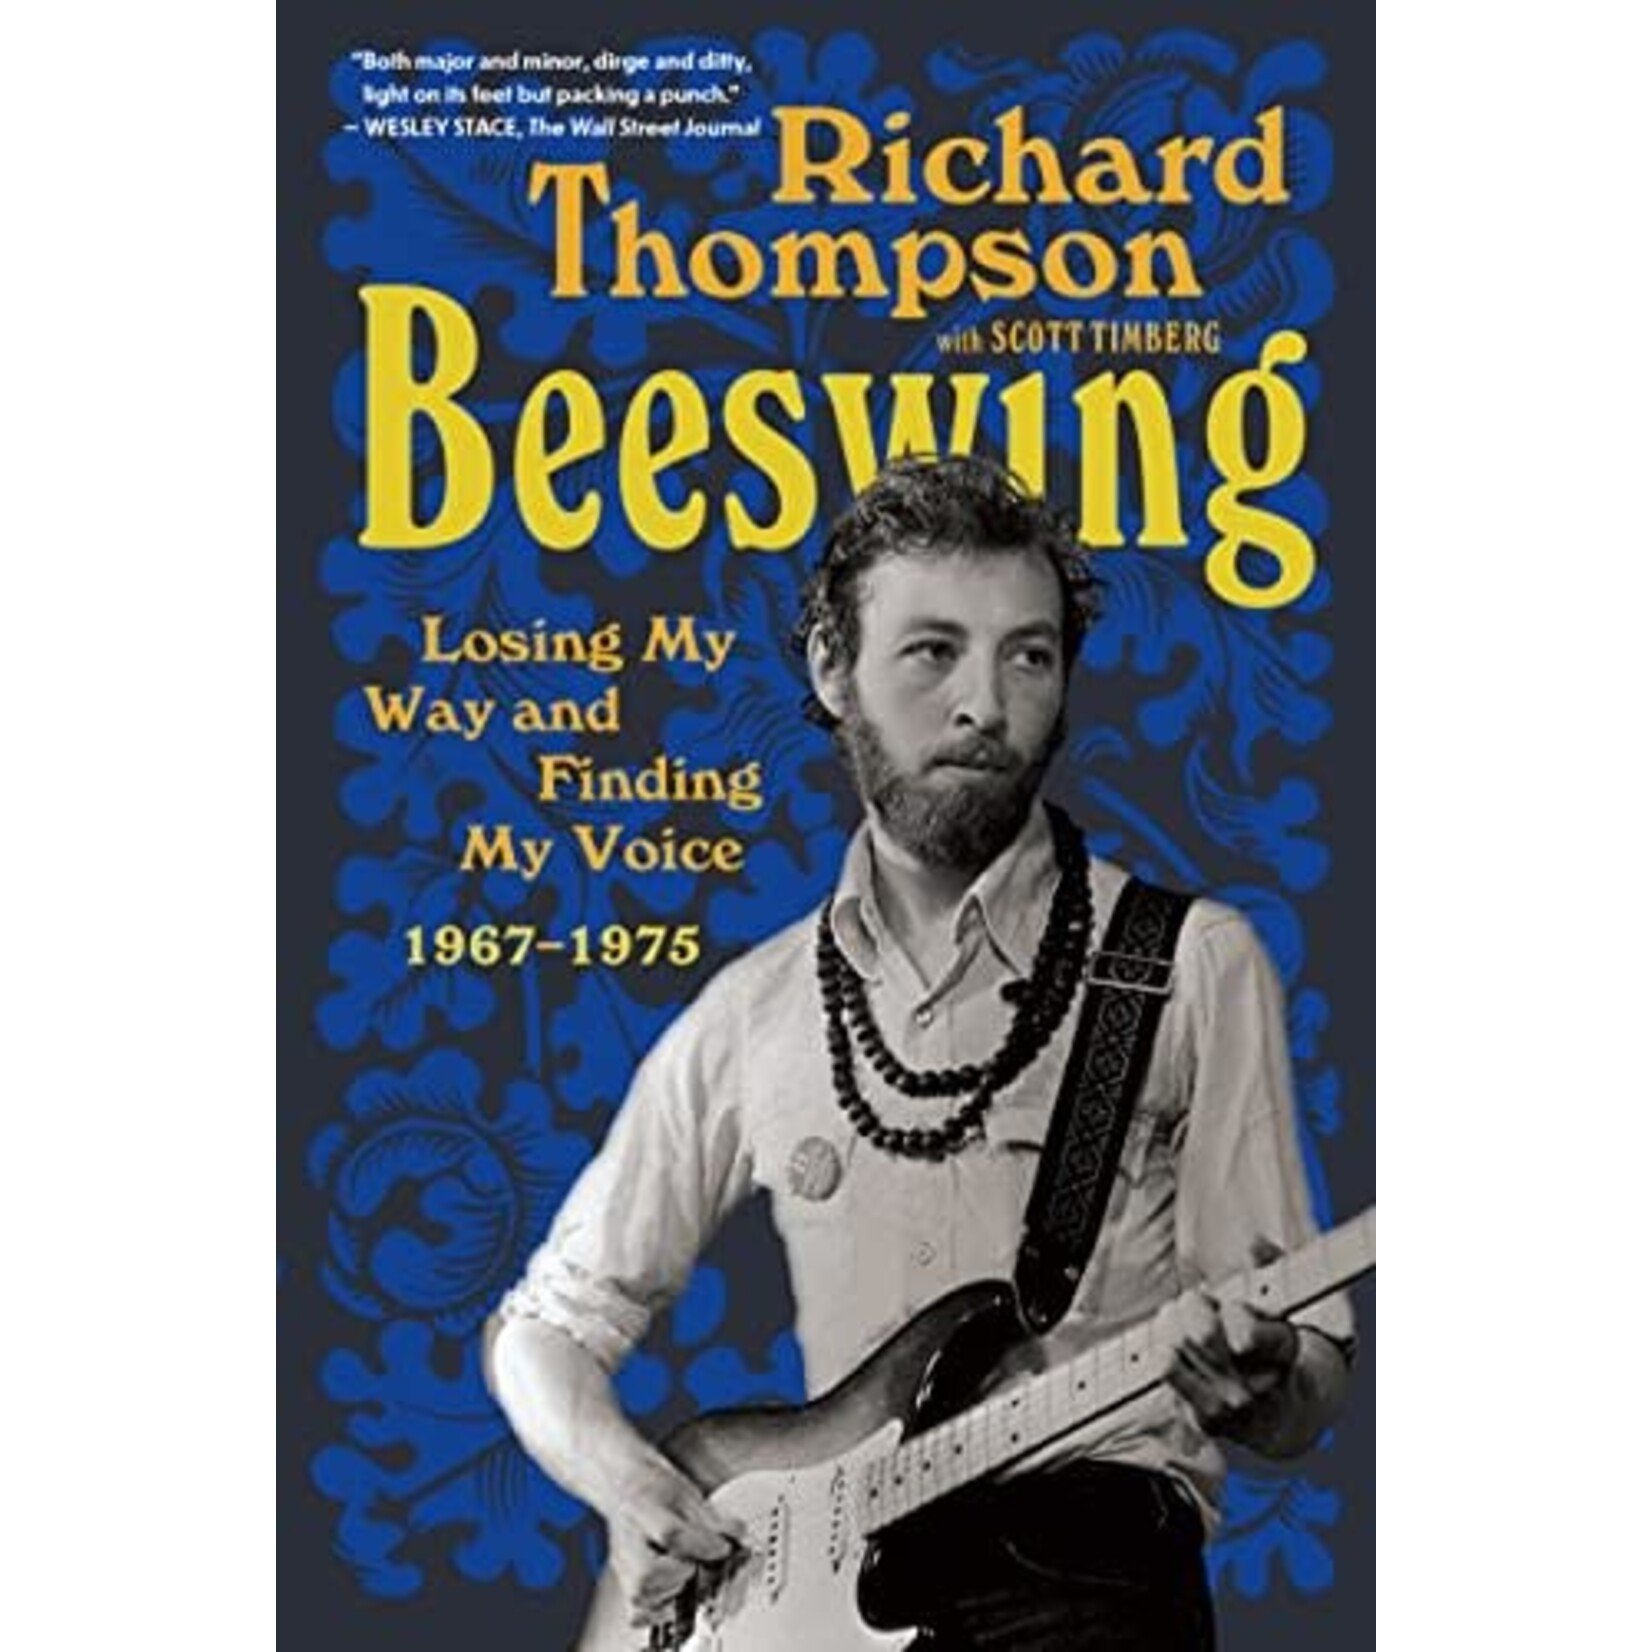 Richard Thompson - Beeswing: Losing My Way And Finding My Voice 1967-1975 [Book]